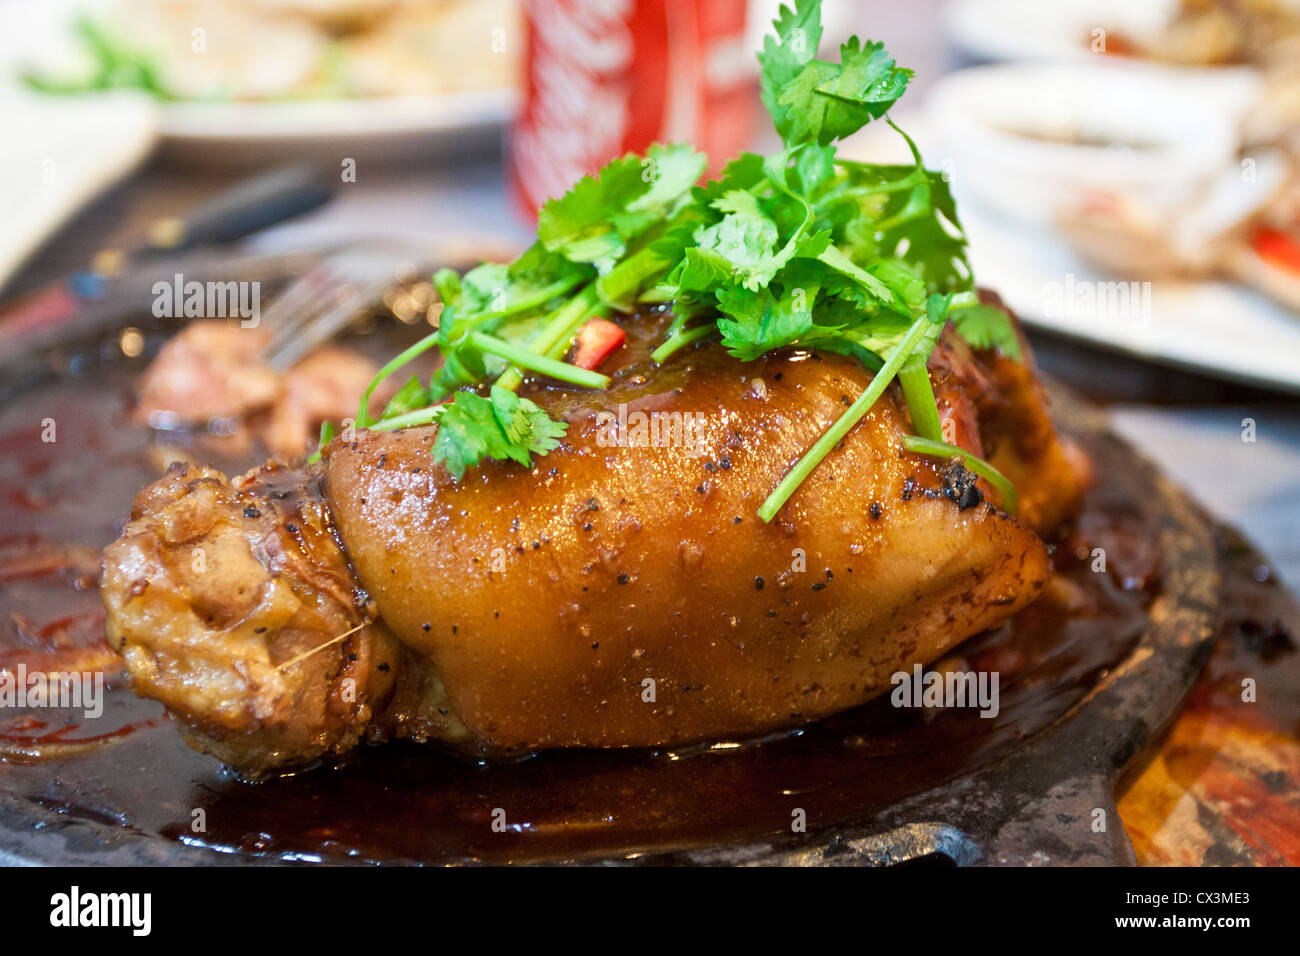 Grilled knuckle of pork with black pepper Stock Photo